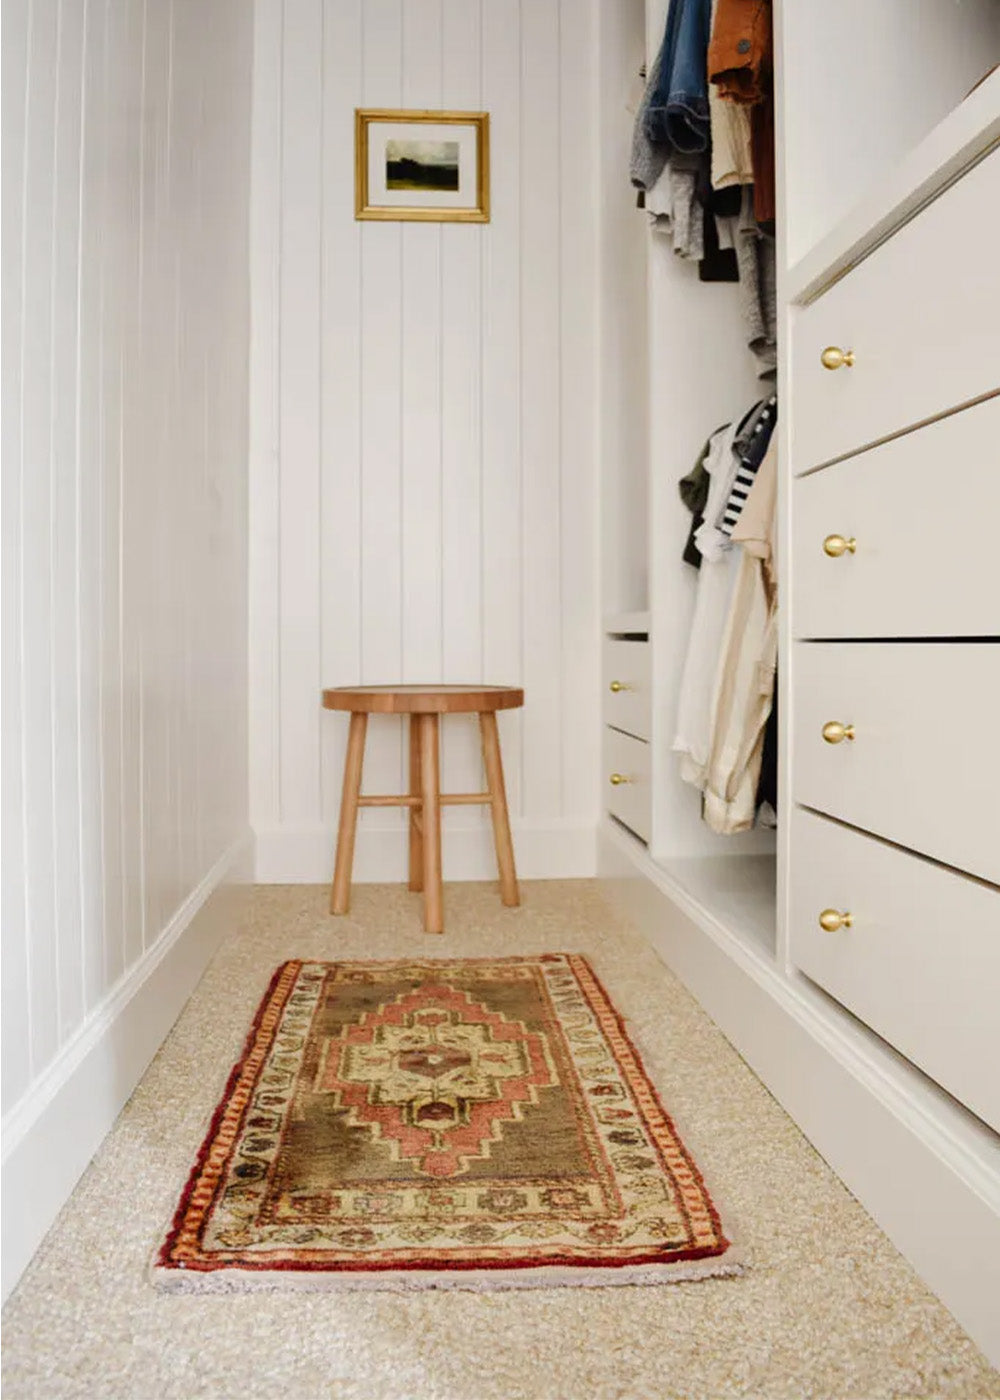 Walk-In closet styling tips with a vintage Turkish rug.